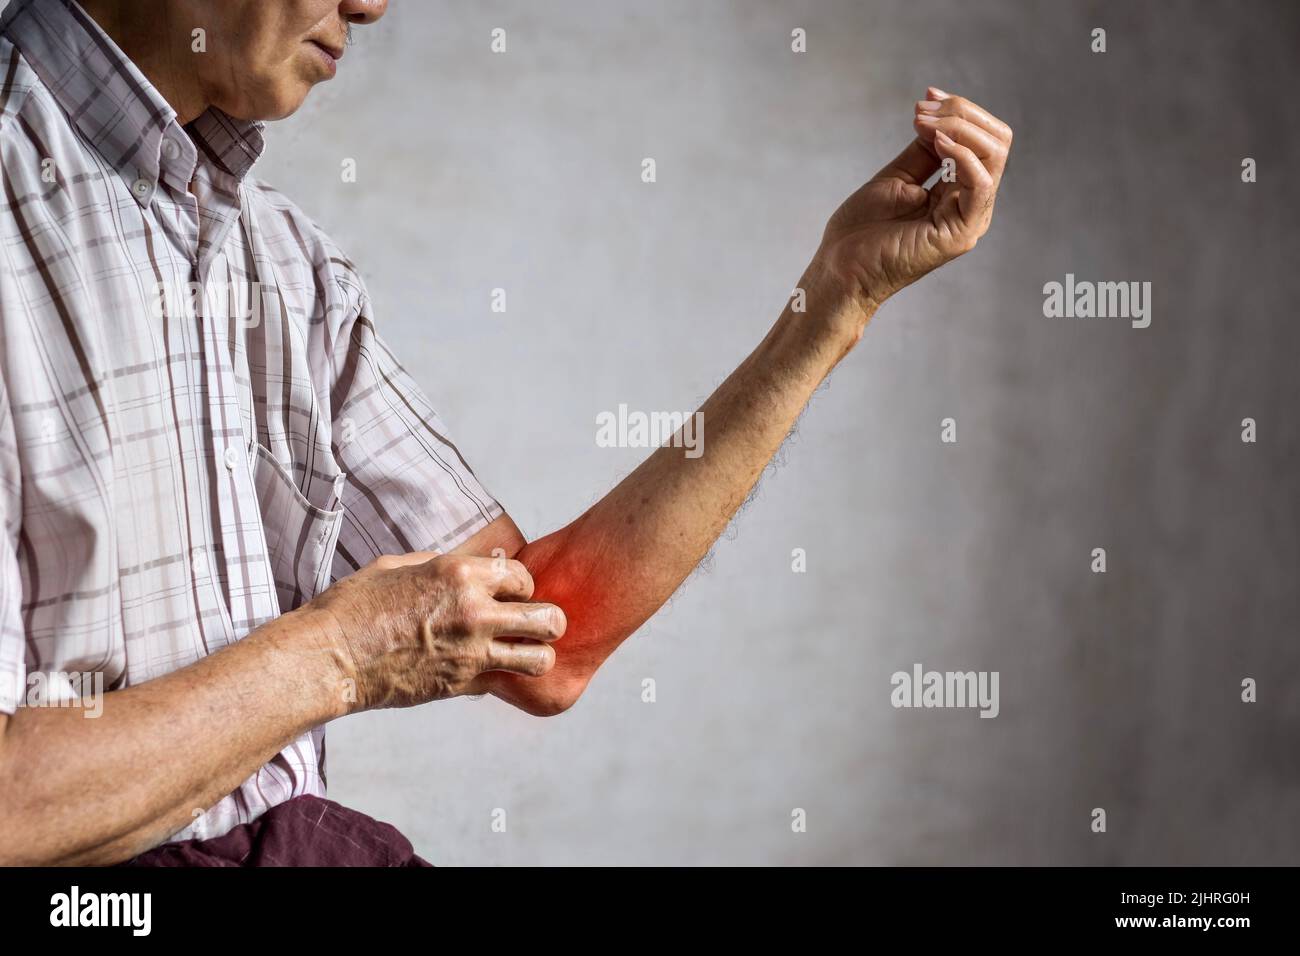 Asian elder man scratching his arm. Concept of itchy skin diseases such as scabies, fungal infection, eczema, psoriasis, allergy, etc. Stock Photo